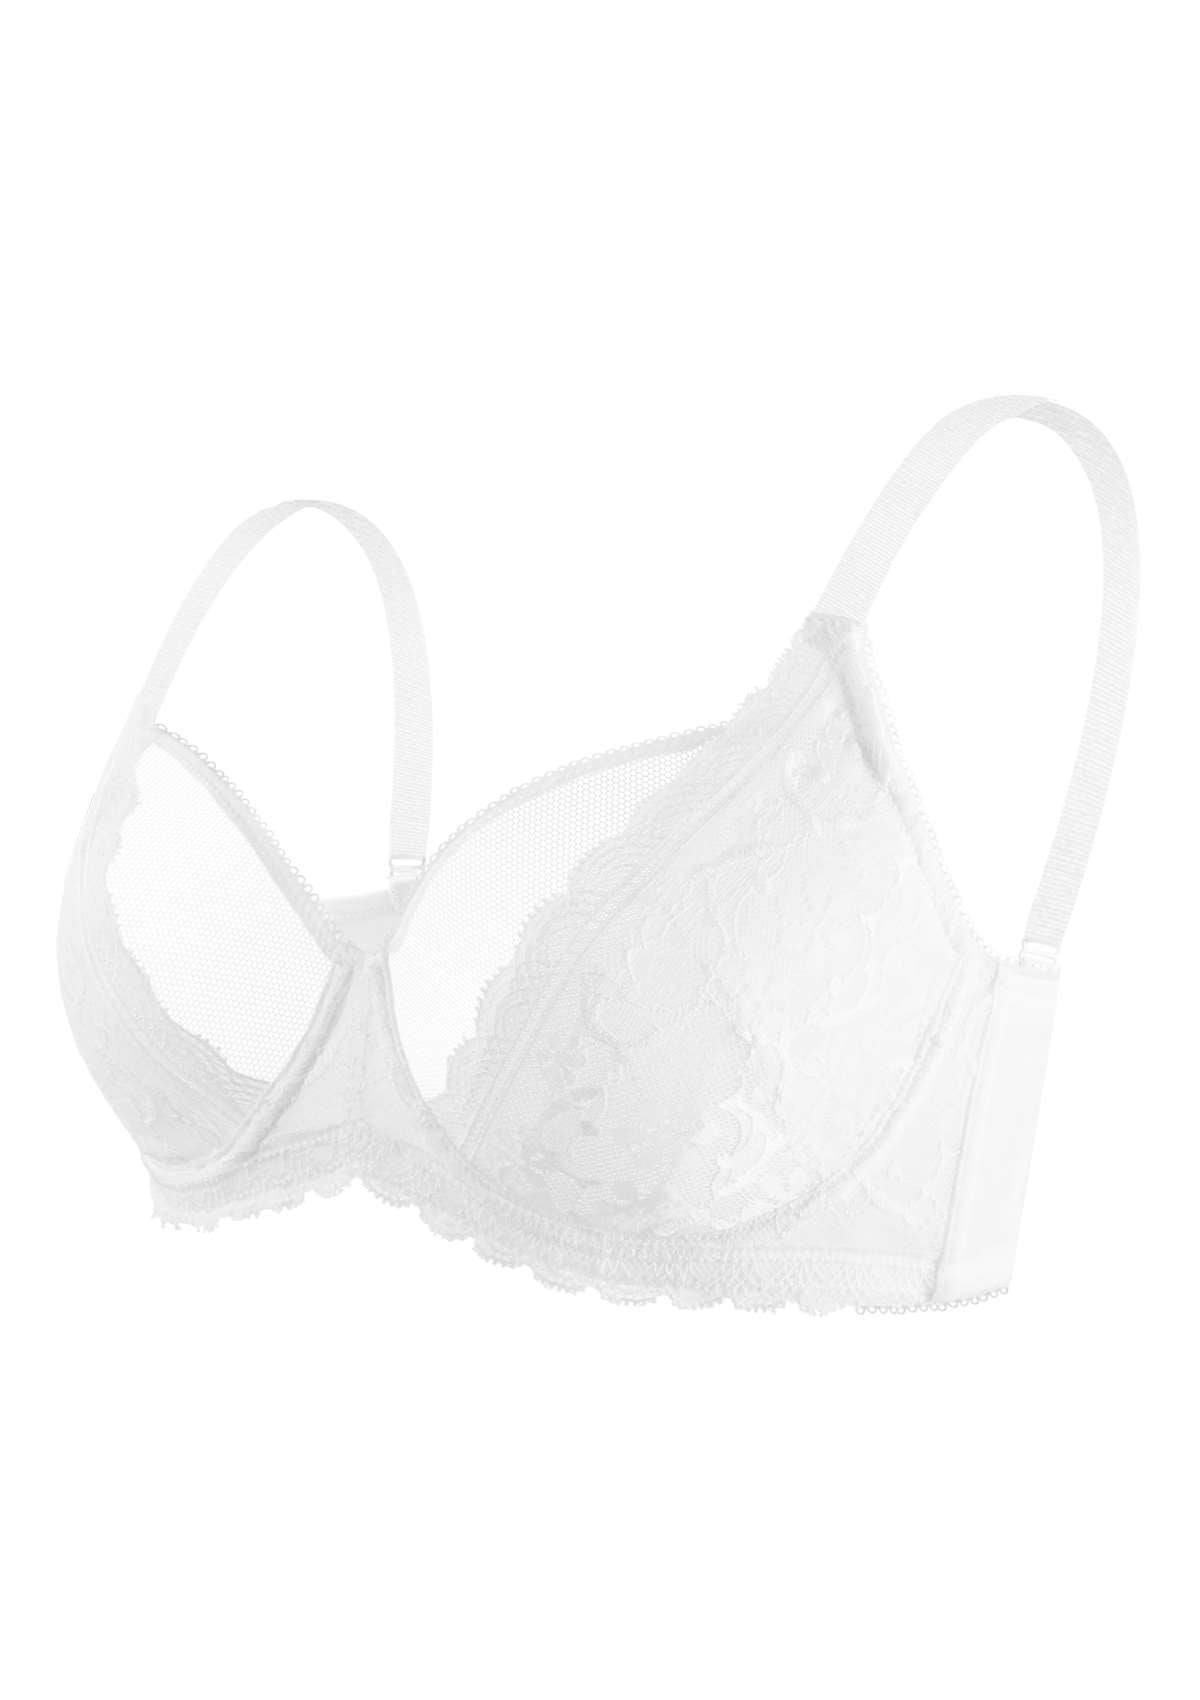 HSIA Anemone Big Bra: Best Bra For Lift And Support, Floral Bra - Light Blue / 40 / D